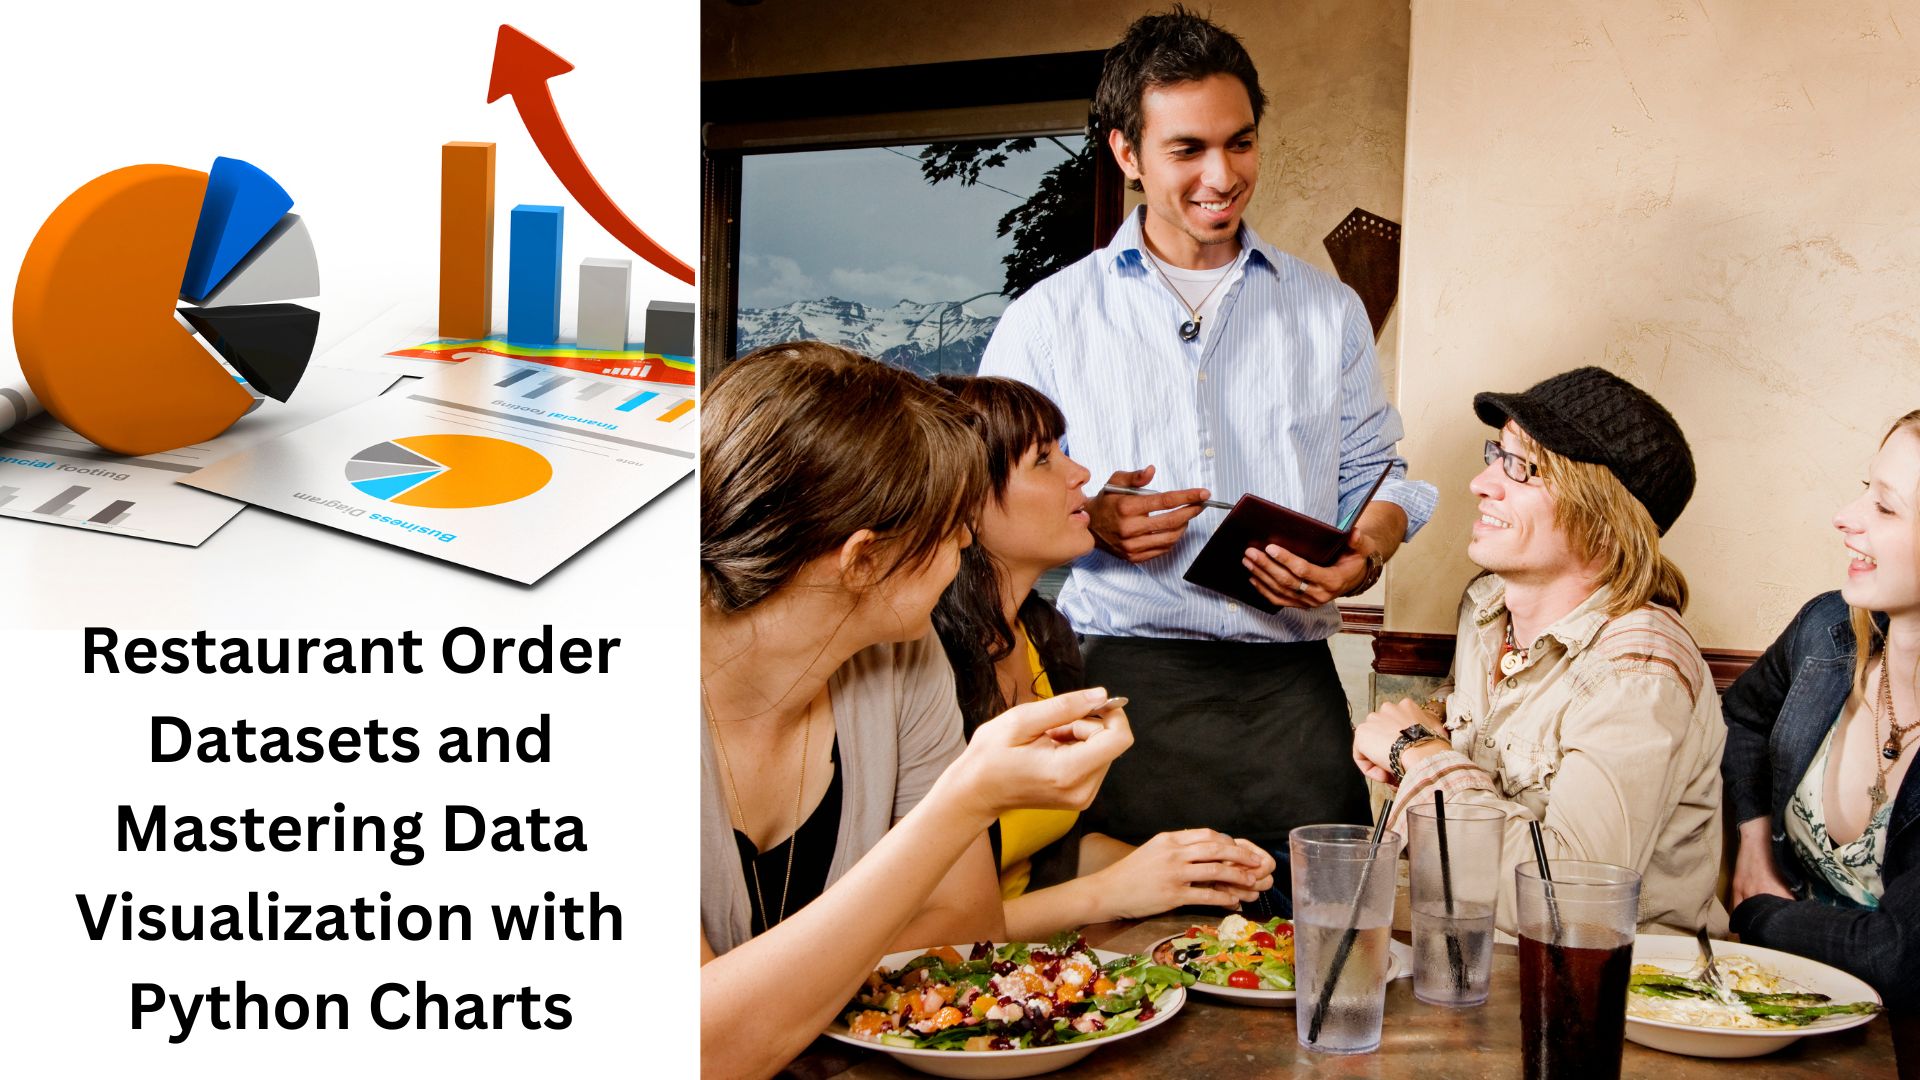 Restaurant Order Datasets and Mastering Data Visualization with Python Charts